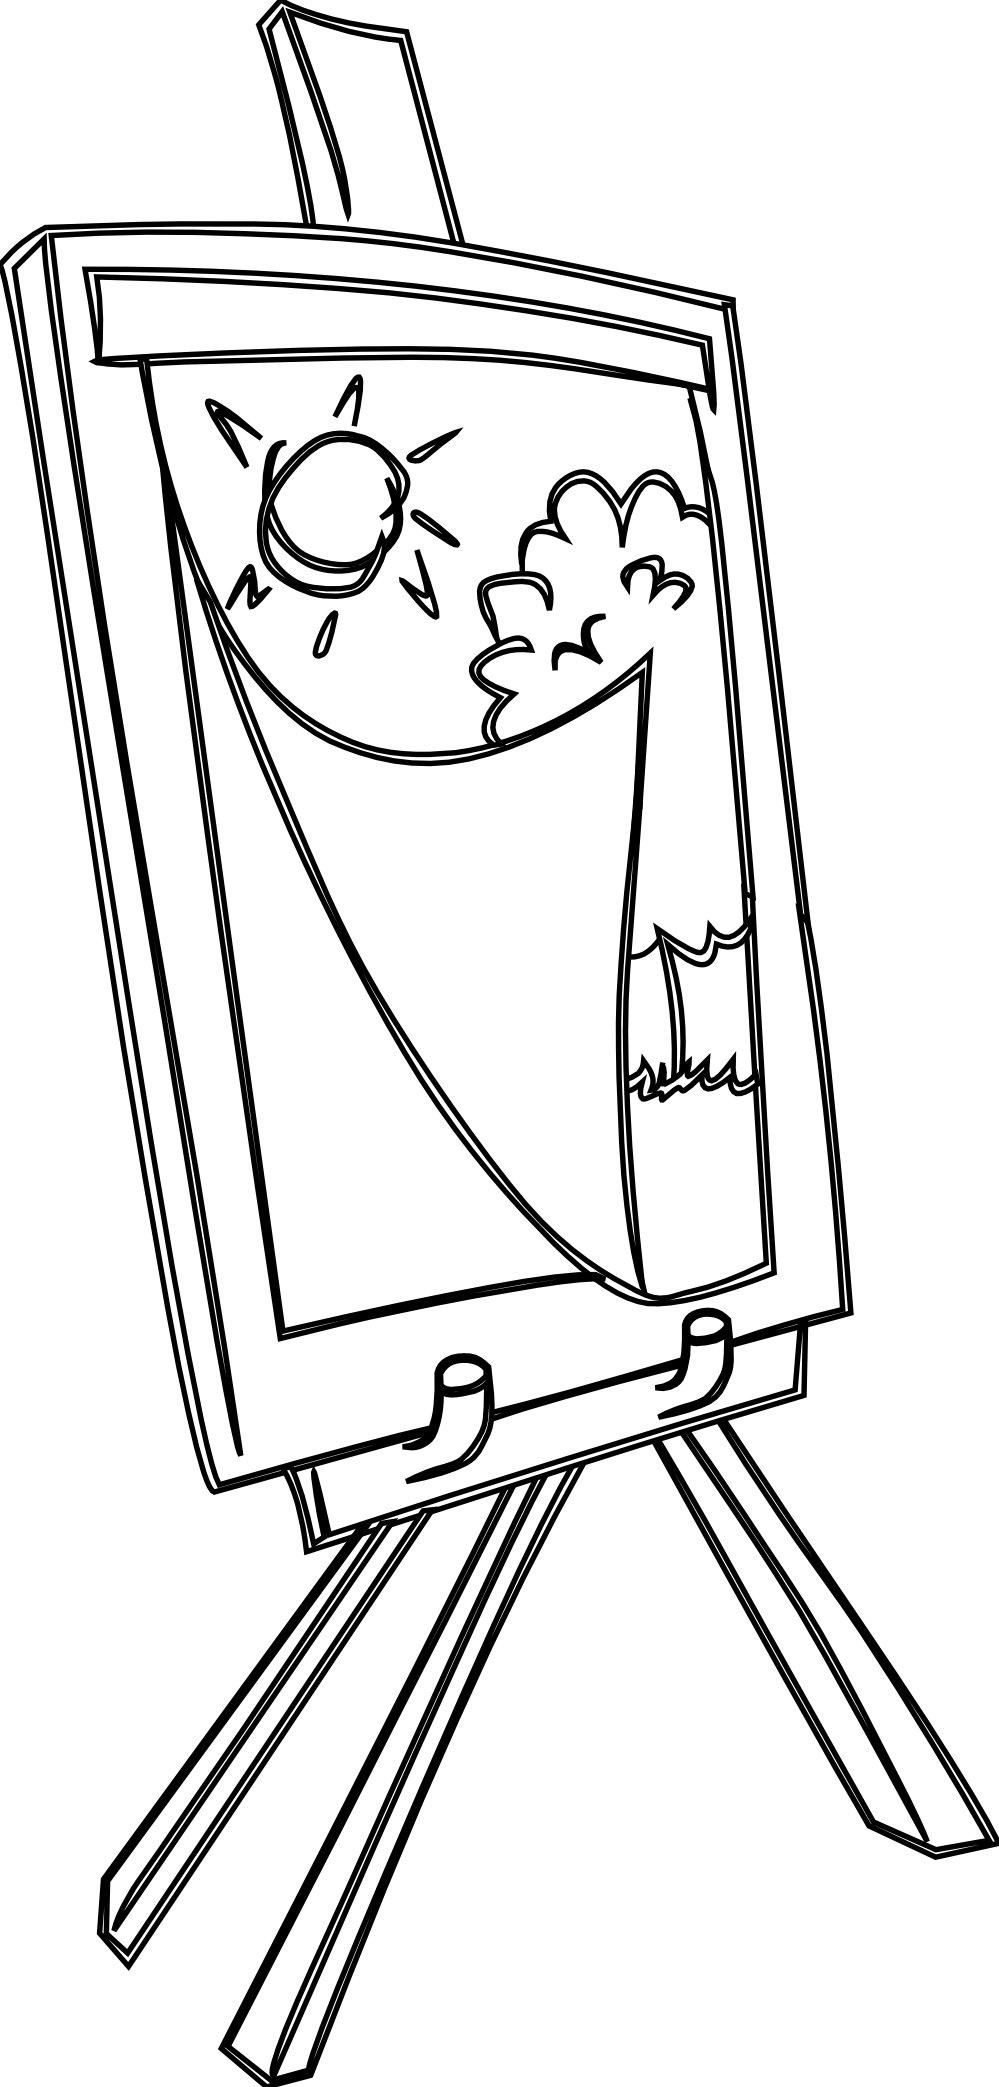 Coloring Book Easel Stock Illustration - Download Image Now